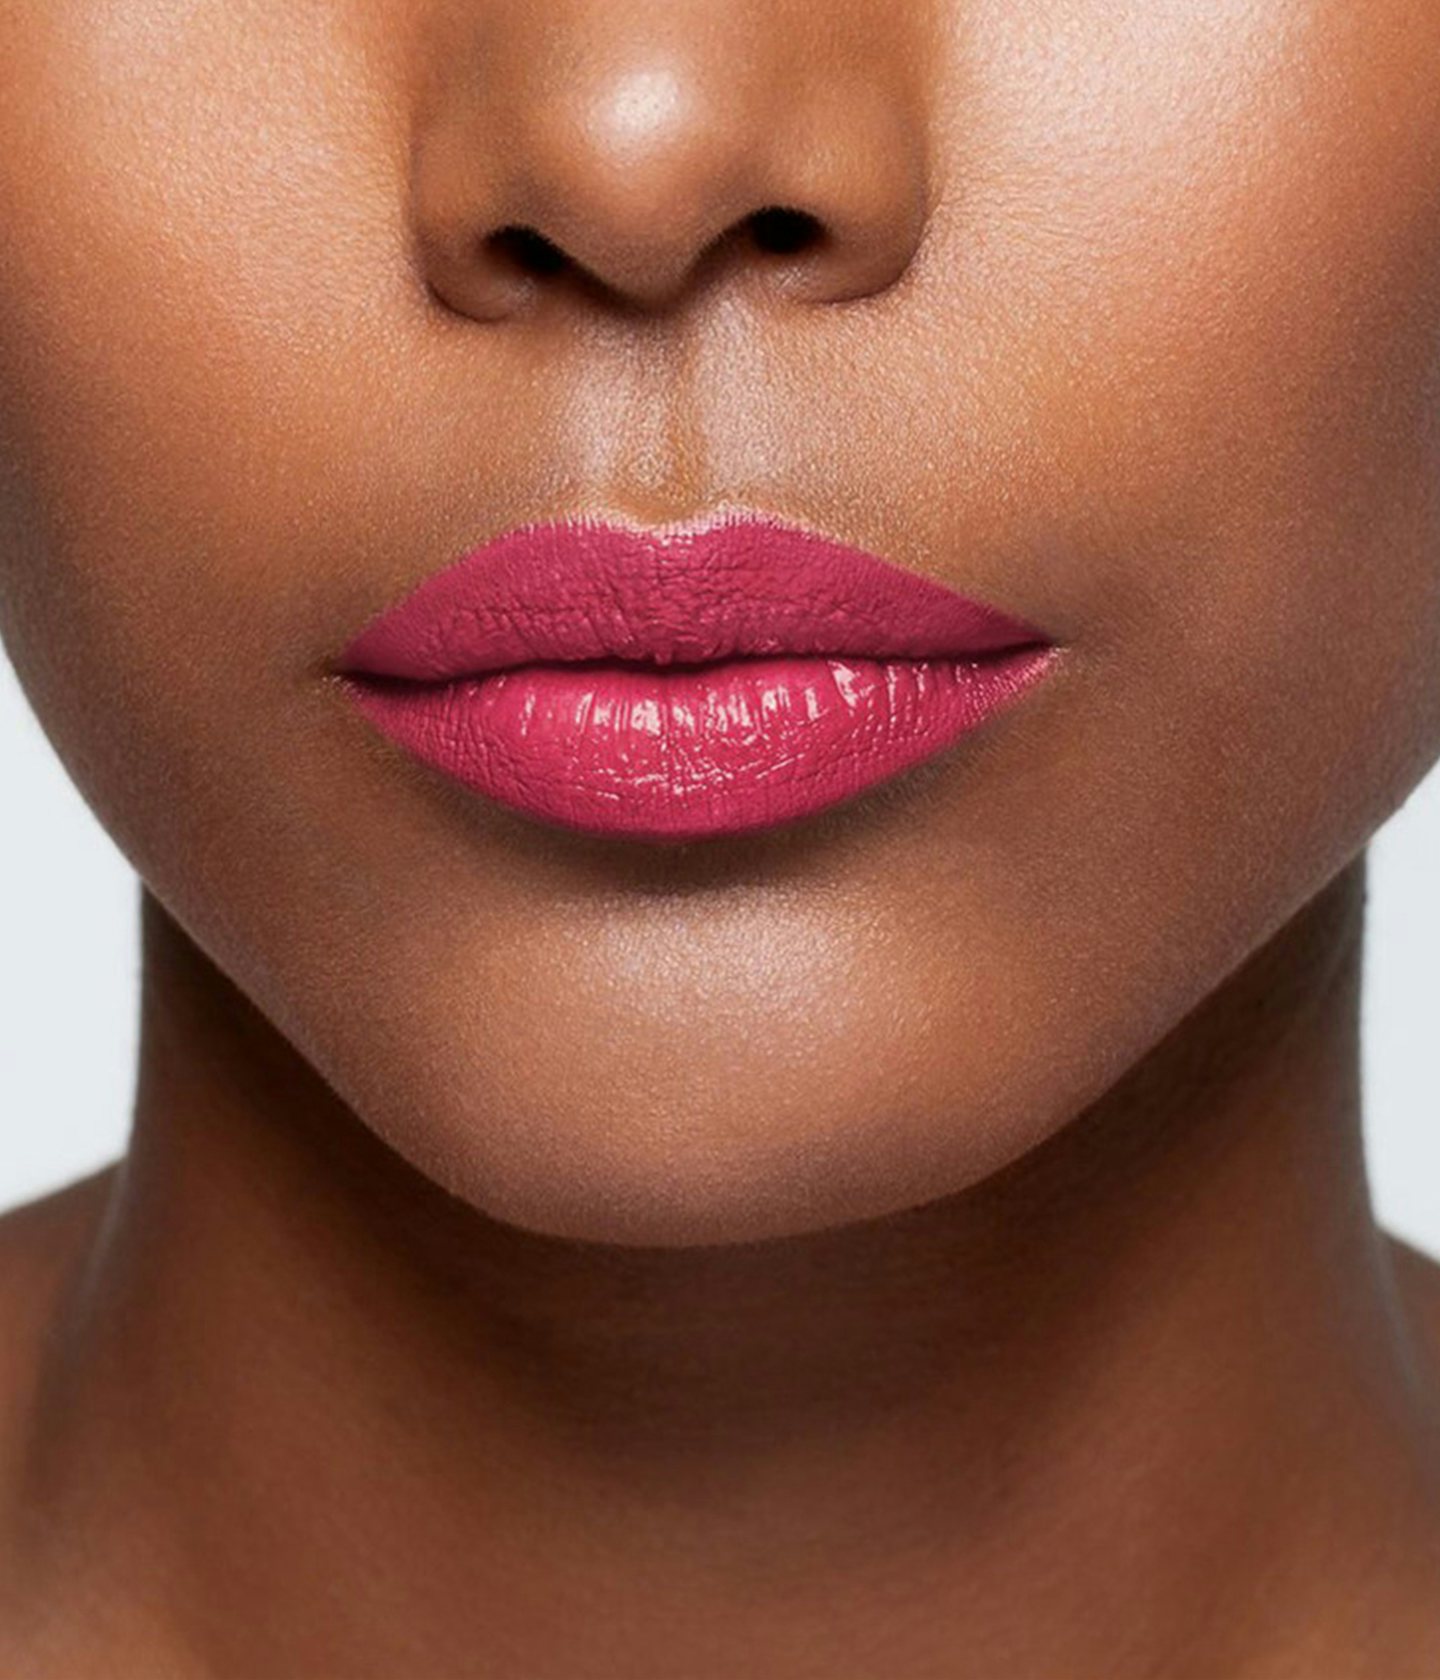 La bouche rouge Innocent Red lipstick shade on the lips of a dark skin model